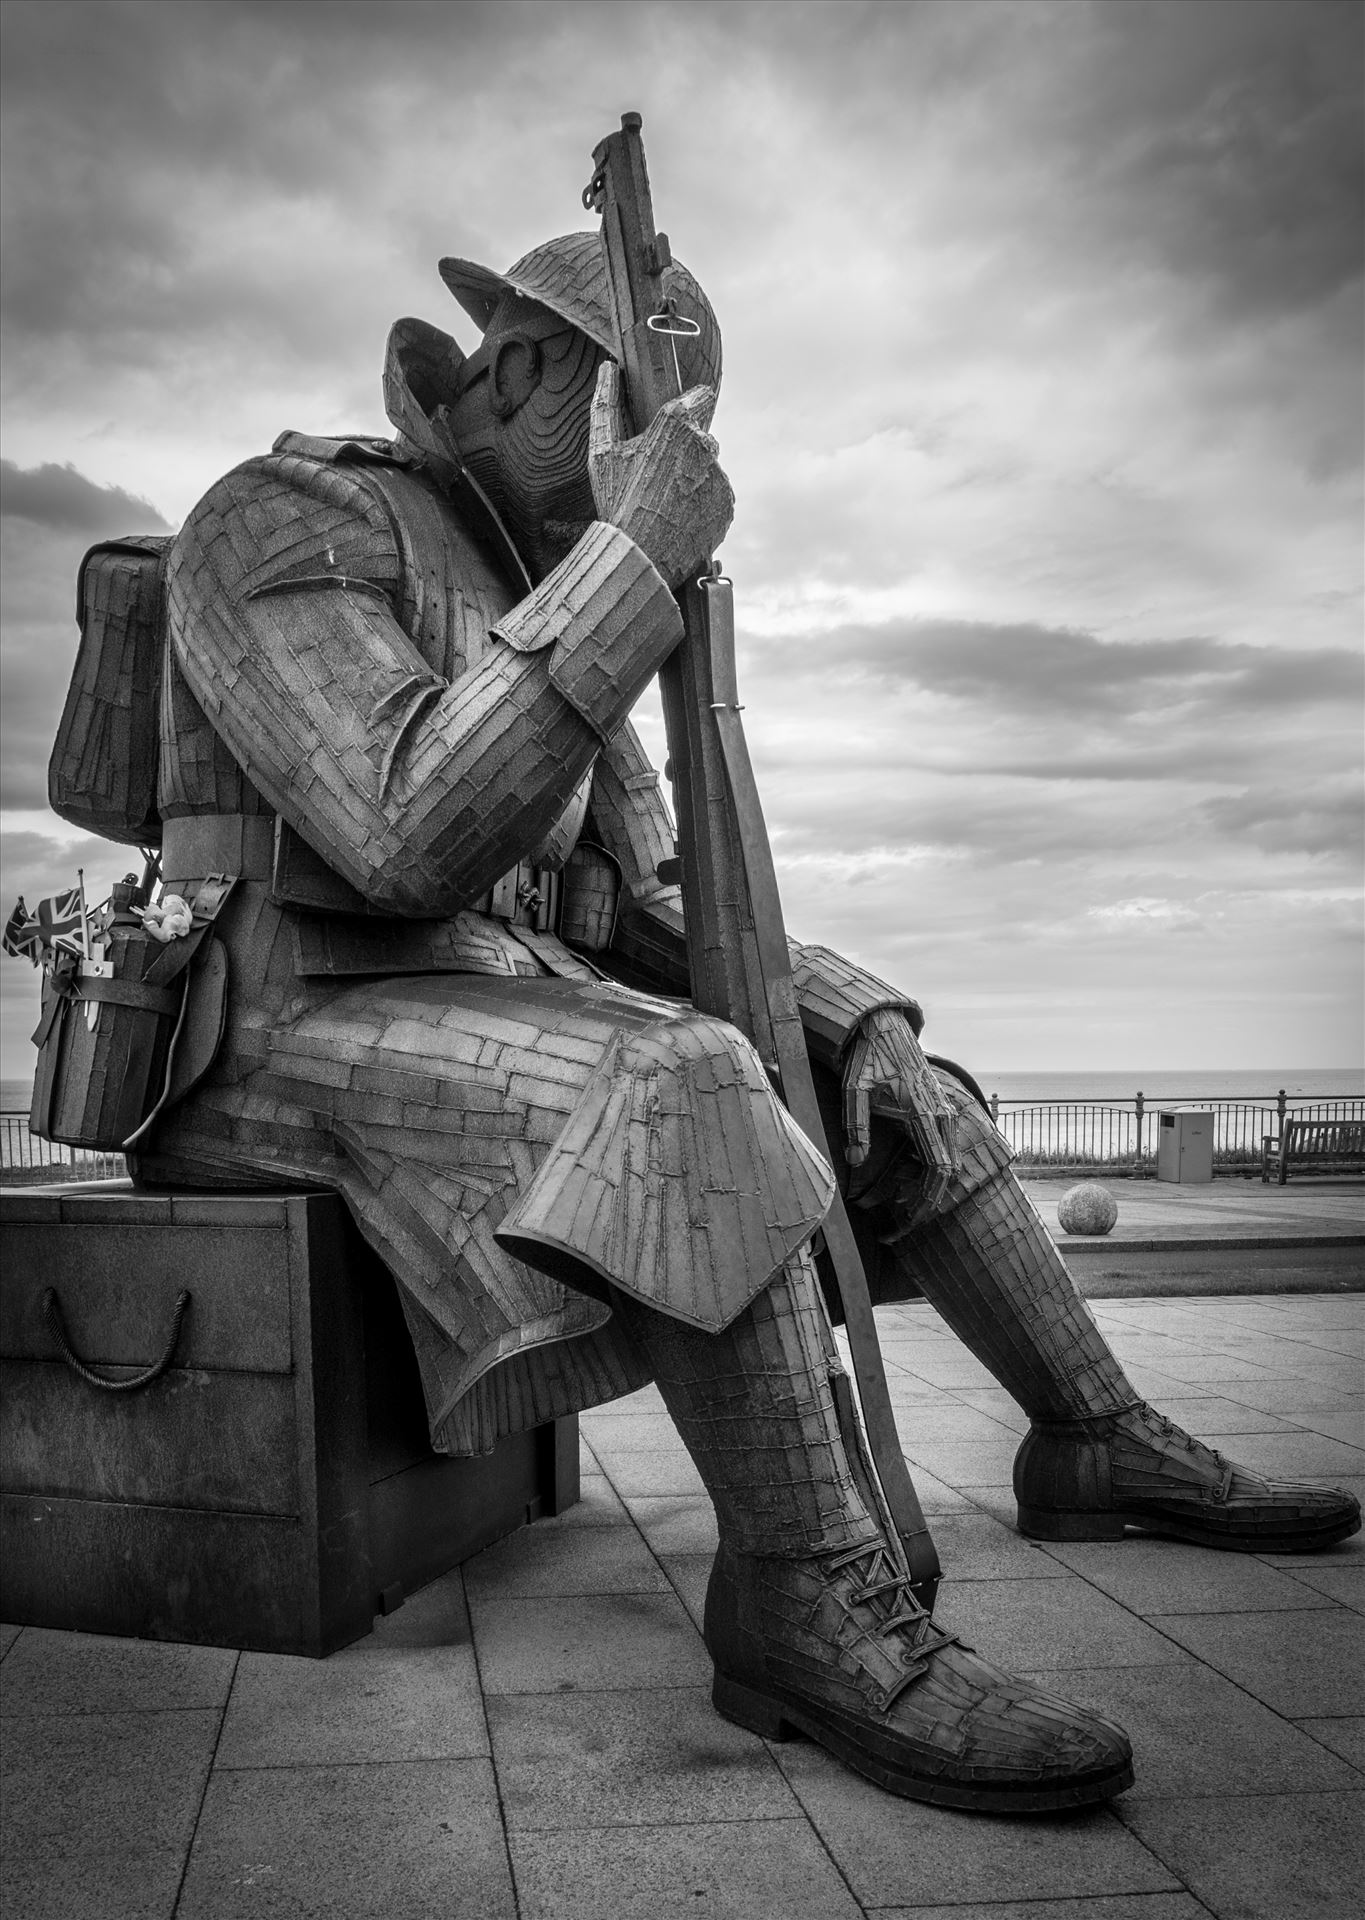 'Tommy' aka 1101 The steel statue weighs 1.2 tonnes, and is 9 feet 5 inches tall. Depicting a WW1 soldier, wearing full uniform, sitting on an ammunition box. Referring to Archetype Tommy Atkins. '1101' refers to the 1st minute of peace in 1918. by Graham Dobson Photography